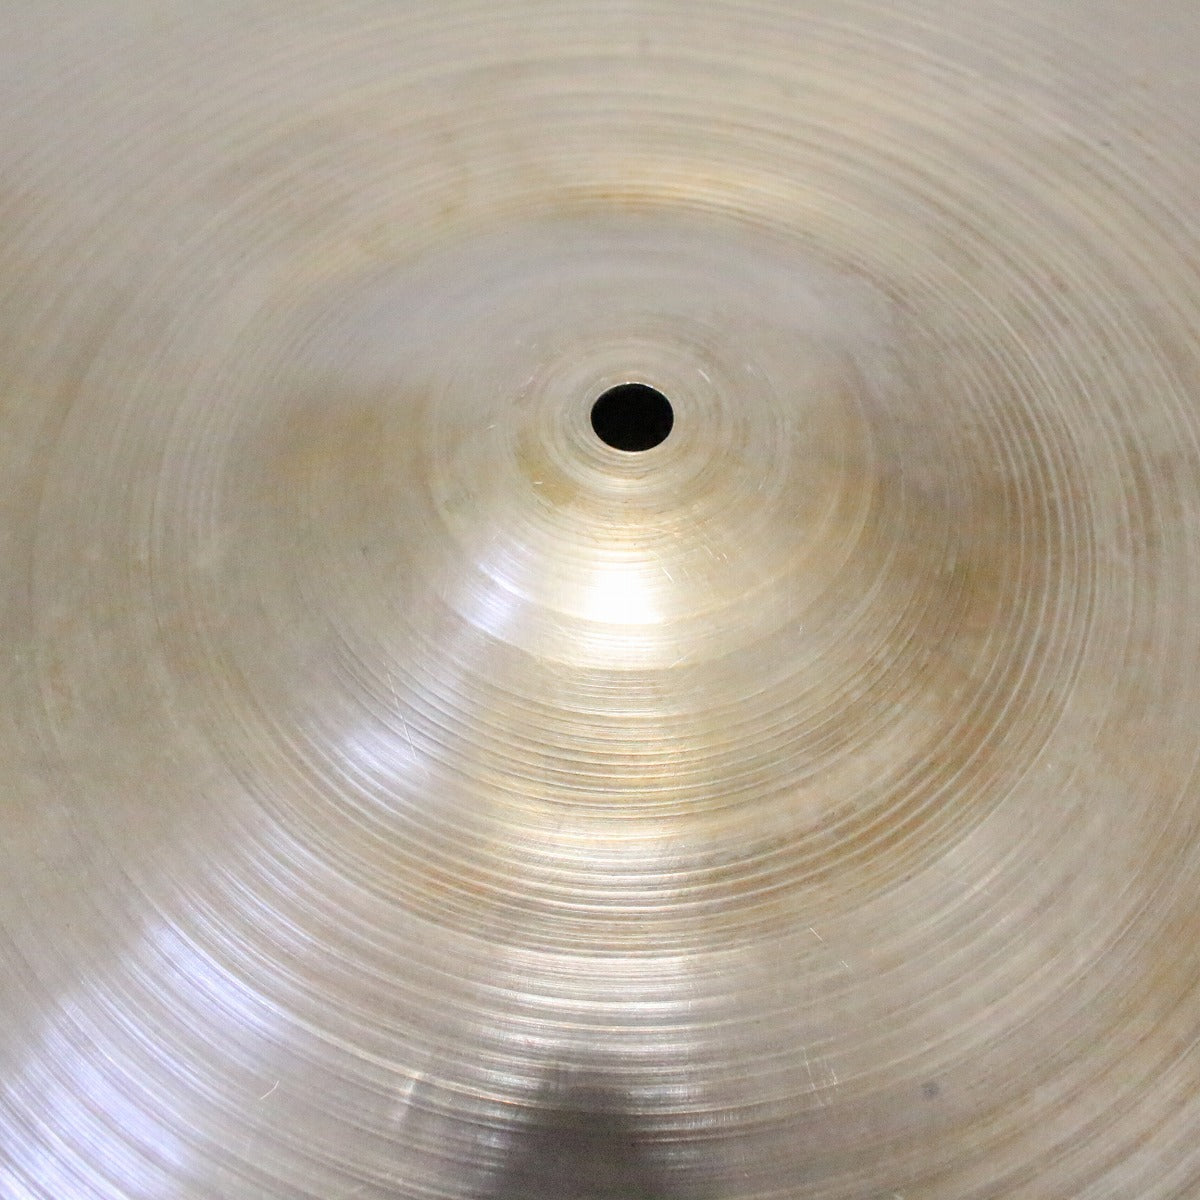 USED ZILDJIAN / Late50s A Small Stamp 20" 2212g Old A Ride Cymbal [08]